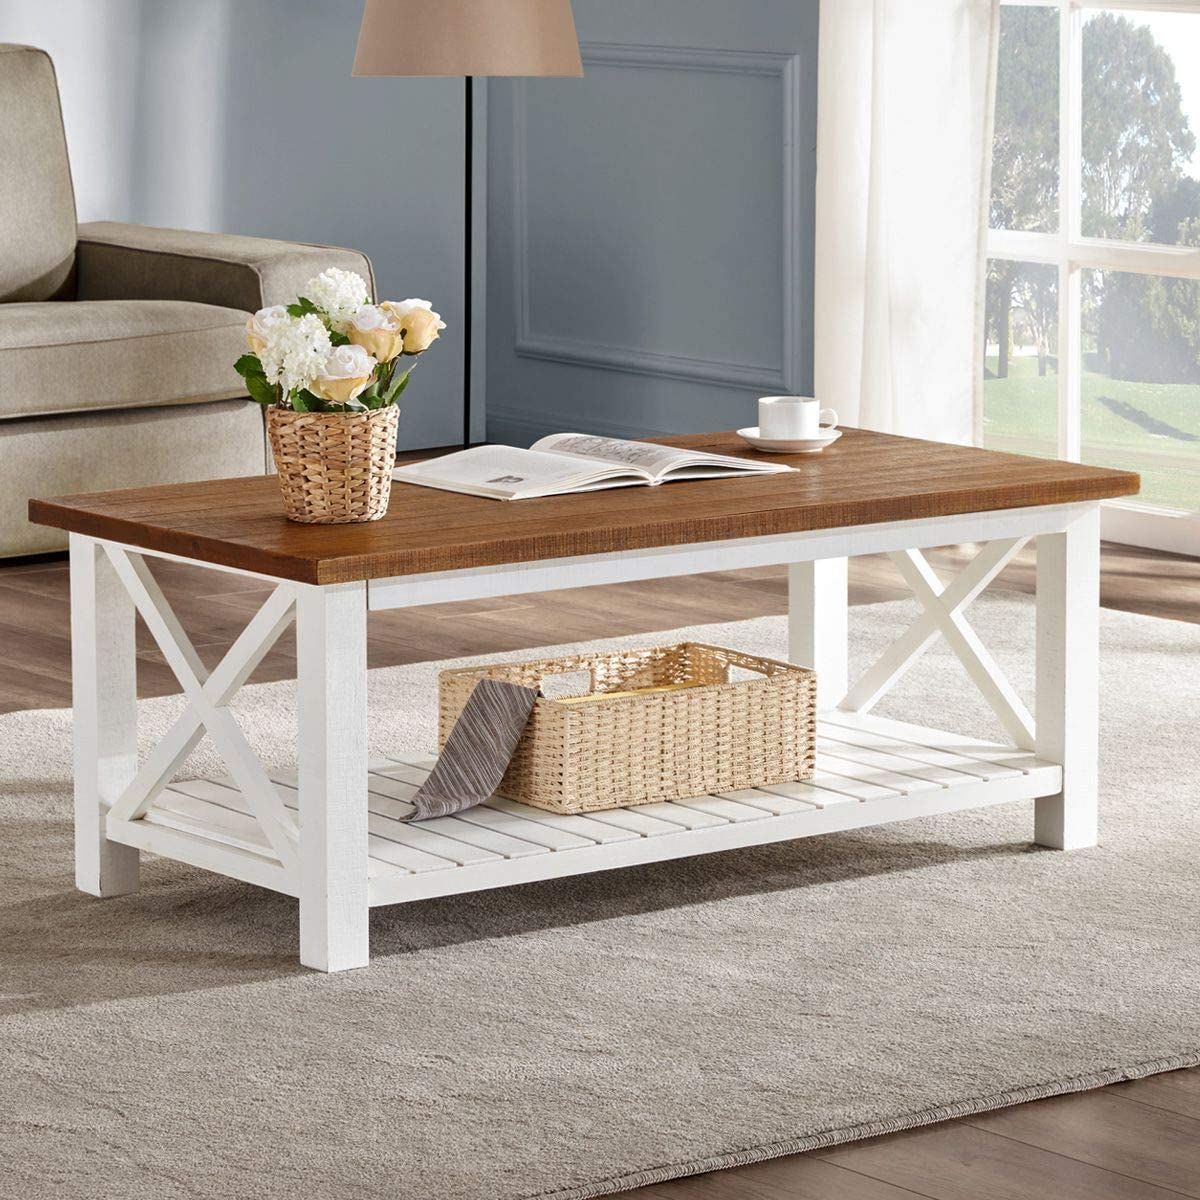 The 10 Best Farmhouse Coffee Tables (for Any Budget) With Regard To Living Room Farmhouse Coffee Tables (Gallery 2 of 20)